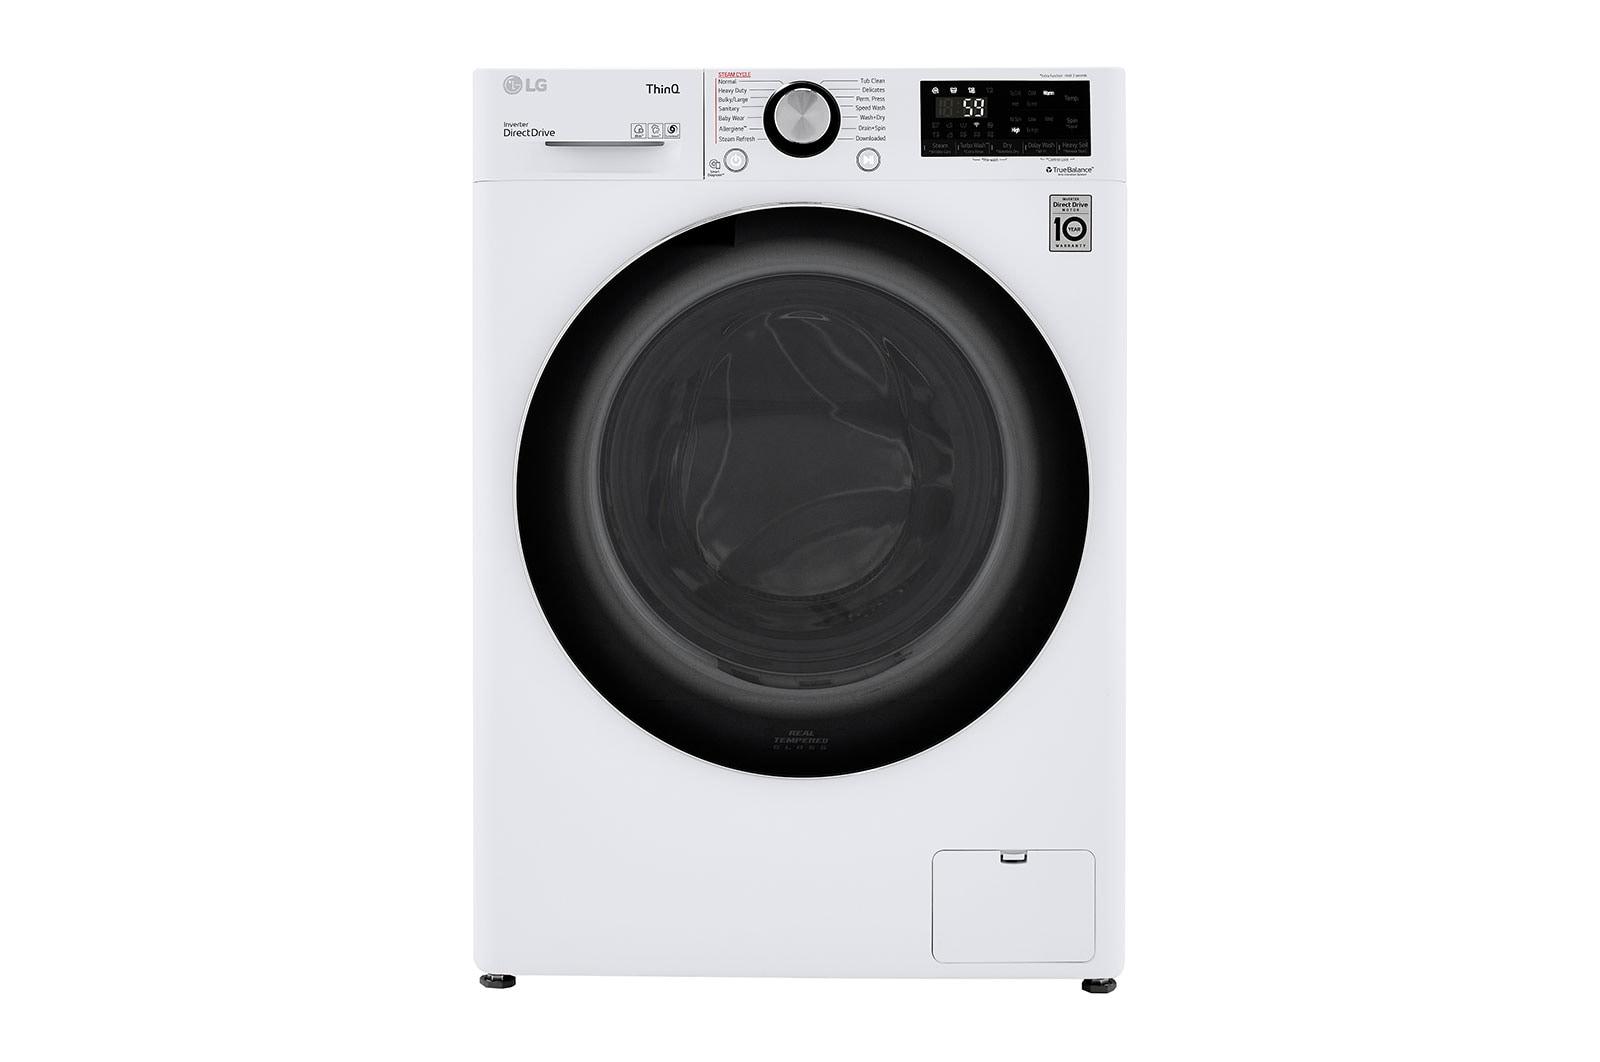 2.4 cu.ft. Smart wi-fi Enabled Compact Front Load All-In-One Washer/Dryer Combo with Built-In Intelligence